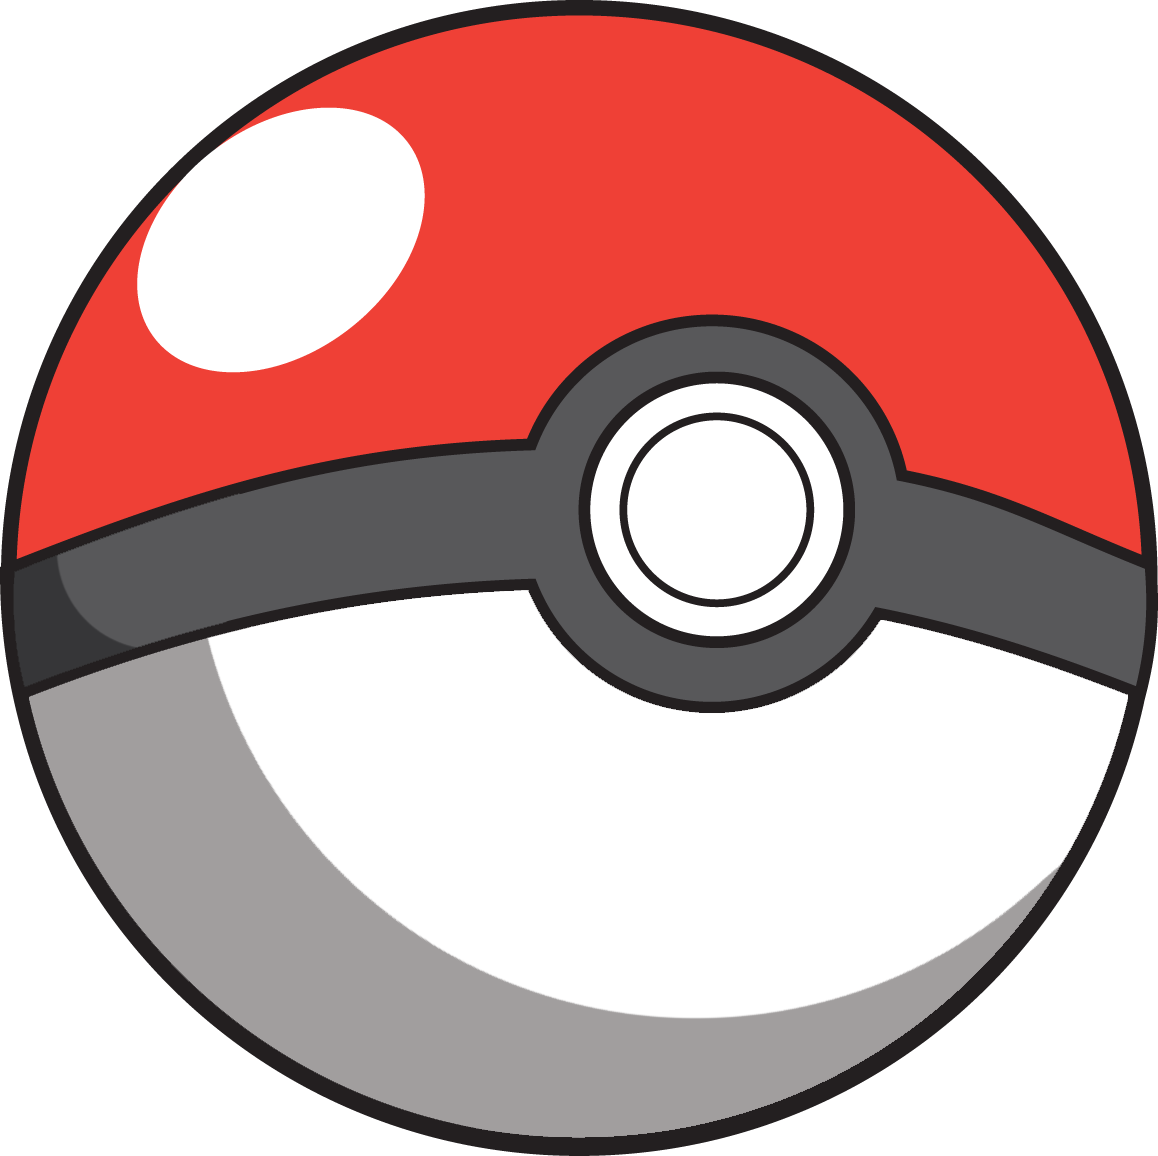 Pokeball PNG transparent image download, size: 1158x1156px